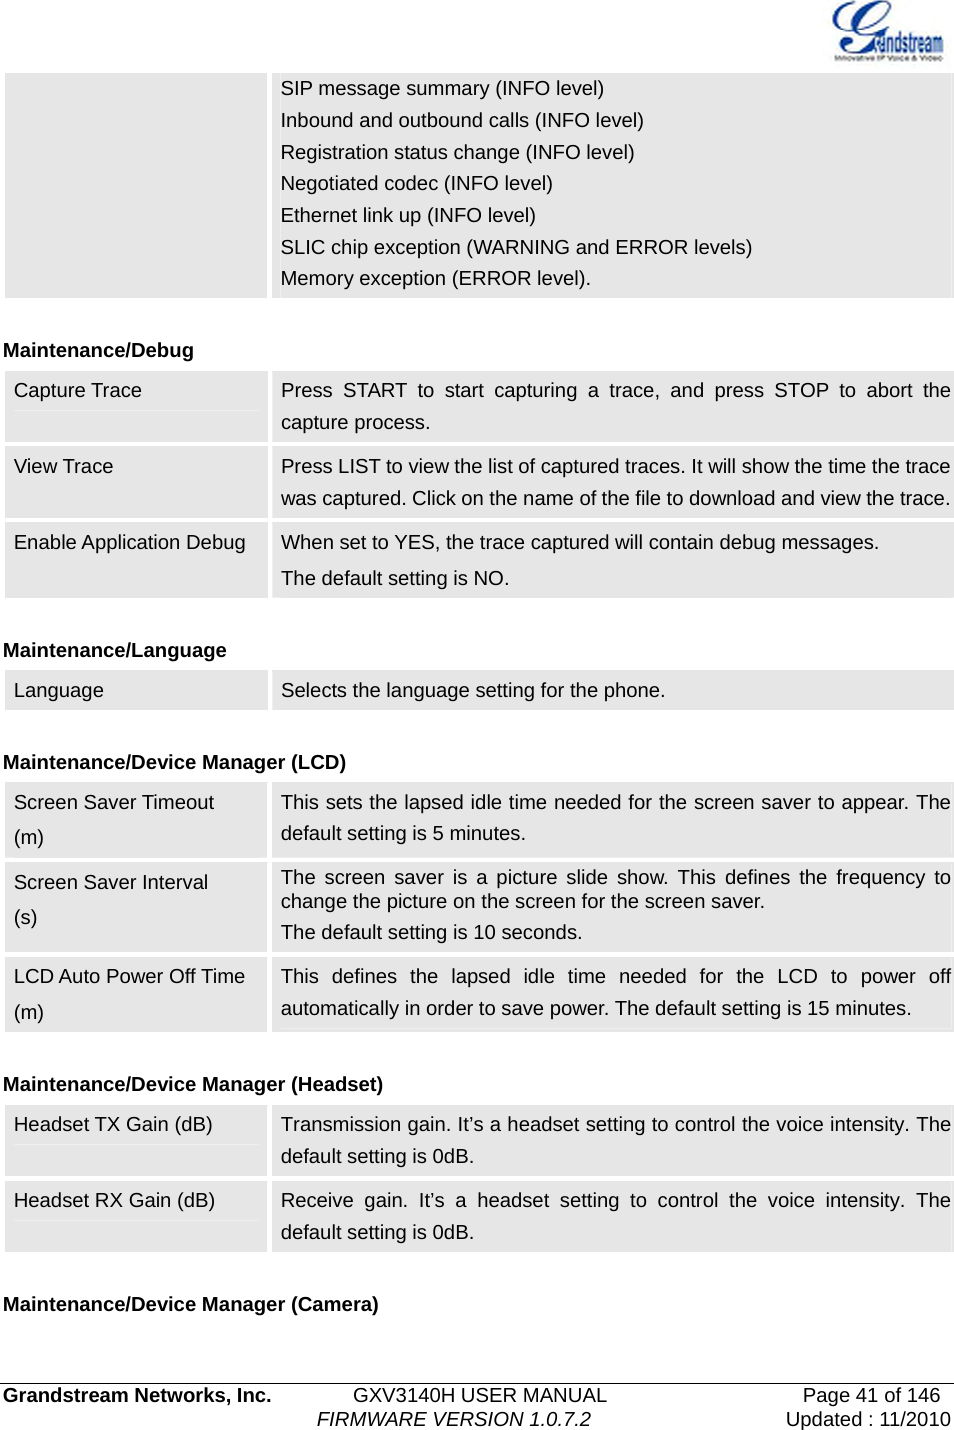   Grandstream Networks, Inc.        GXV3140H USER MANUAL                  Page 41 of 146                                FIRMWARE VERSION 1.0.7.2 Updated : 11/2010  SIP message summary (INFO level) Inbound and outbound calls (INFO level) Registration status change (INFO level) Negotiated codec (INFO level) Ethernet link up (INFO level) SLIC chip exception (WARNING and ERROR levels) Memory exception (ERROR level).  Maintenance/Debug Capture Trace  Press START to start capturing a trace, and press STOP to abort the capture process. View Trace  Press LIST to view the list of captured traces. It will show the time the trace was captured. Click on the name of the file to download and view the trace.Enable Application Debug  When set to YES, the trace captured will contain debug messages.   The default setting is NO.  Maintenance/Language Language  Selects the language setting for the phone.    Maintenance/Device Manager (LCD) Screen Saver Timeout (m) This sets the lapsed idle time needed for the screen saver to appear. The default setting is 5 minutes. Screen Saver Interval (s) The screen saver is a picture slide show. This defines the frequency to change the picture on the screen for the screen saver.   The default setting is 10 seconds. LCD Auto Power Off Time (m) This defines the lapsed idle time needed for the LCD to power off automatically in order to save power. The default setting is 15 minutes.  Maintenance/Device Manager (Headset) Headset TX Gain (dB)  Transmission gain. It’s a headset setting to control the voice intensity. The default setting is 0dB. Headset RX Gain (dB)  Receive gain. It’s a headset setting to control the voice intensity. The default setting is 0dB.  Maintenance/Device Manager (Camera) 